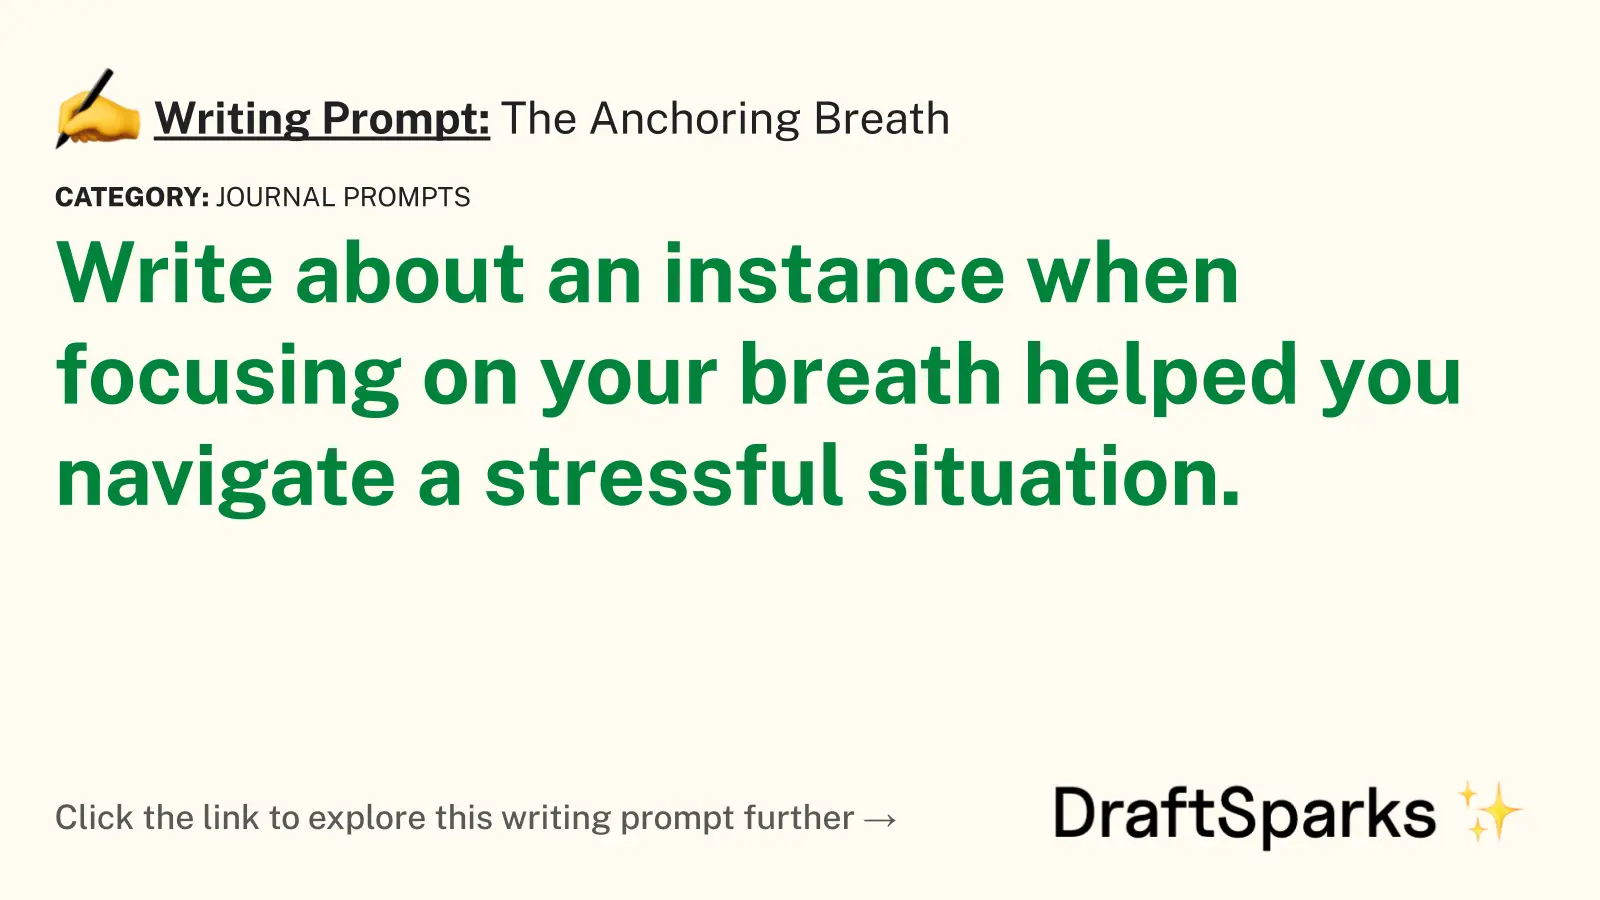 The Anchoring Breath